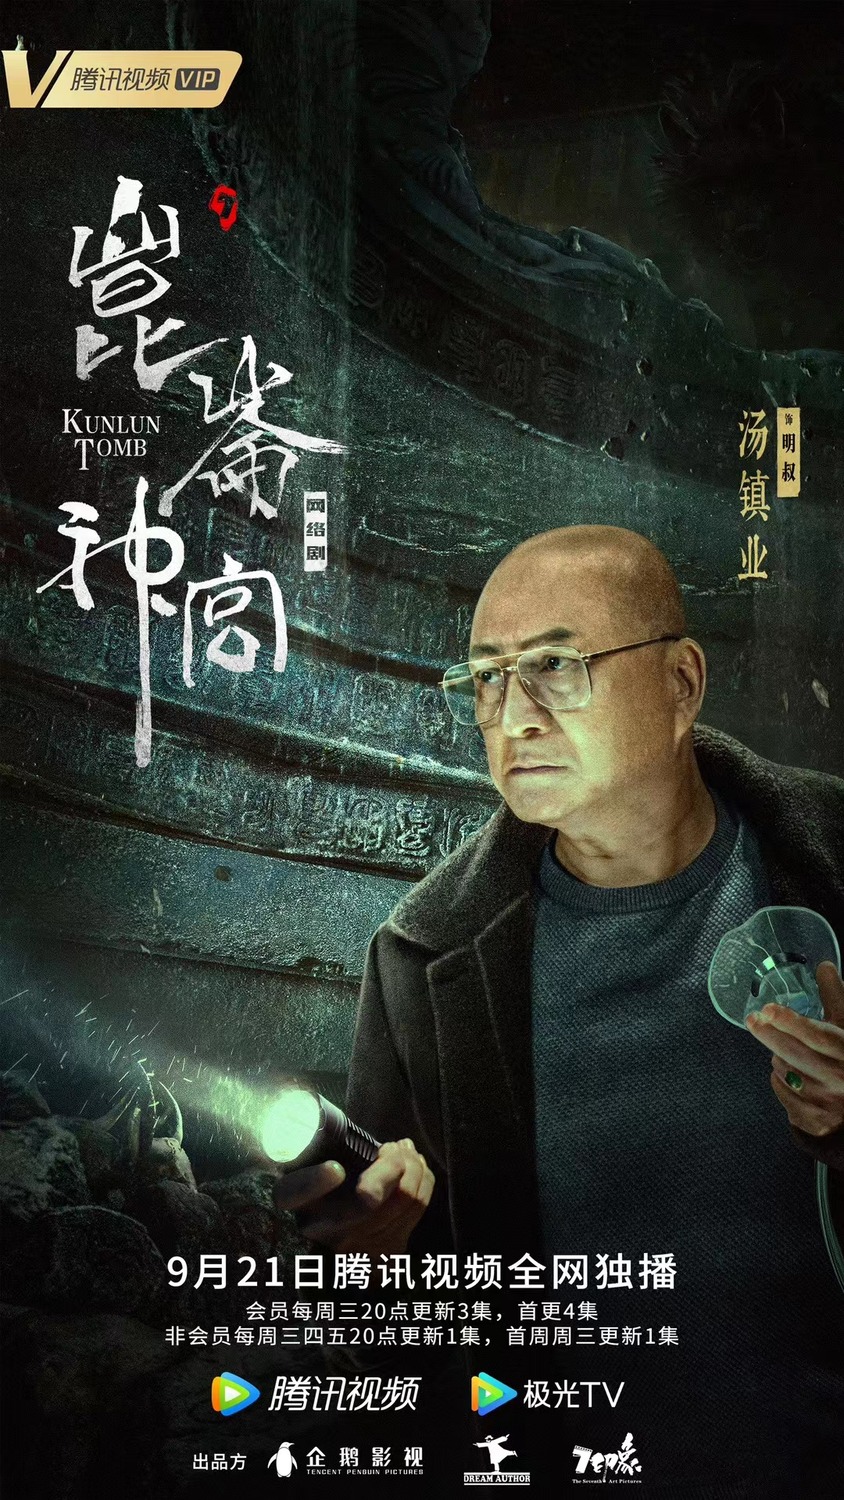 Extra Large TV Poster Image for Candle in the Tomb: Kunlun Tomb (#5 of 8)